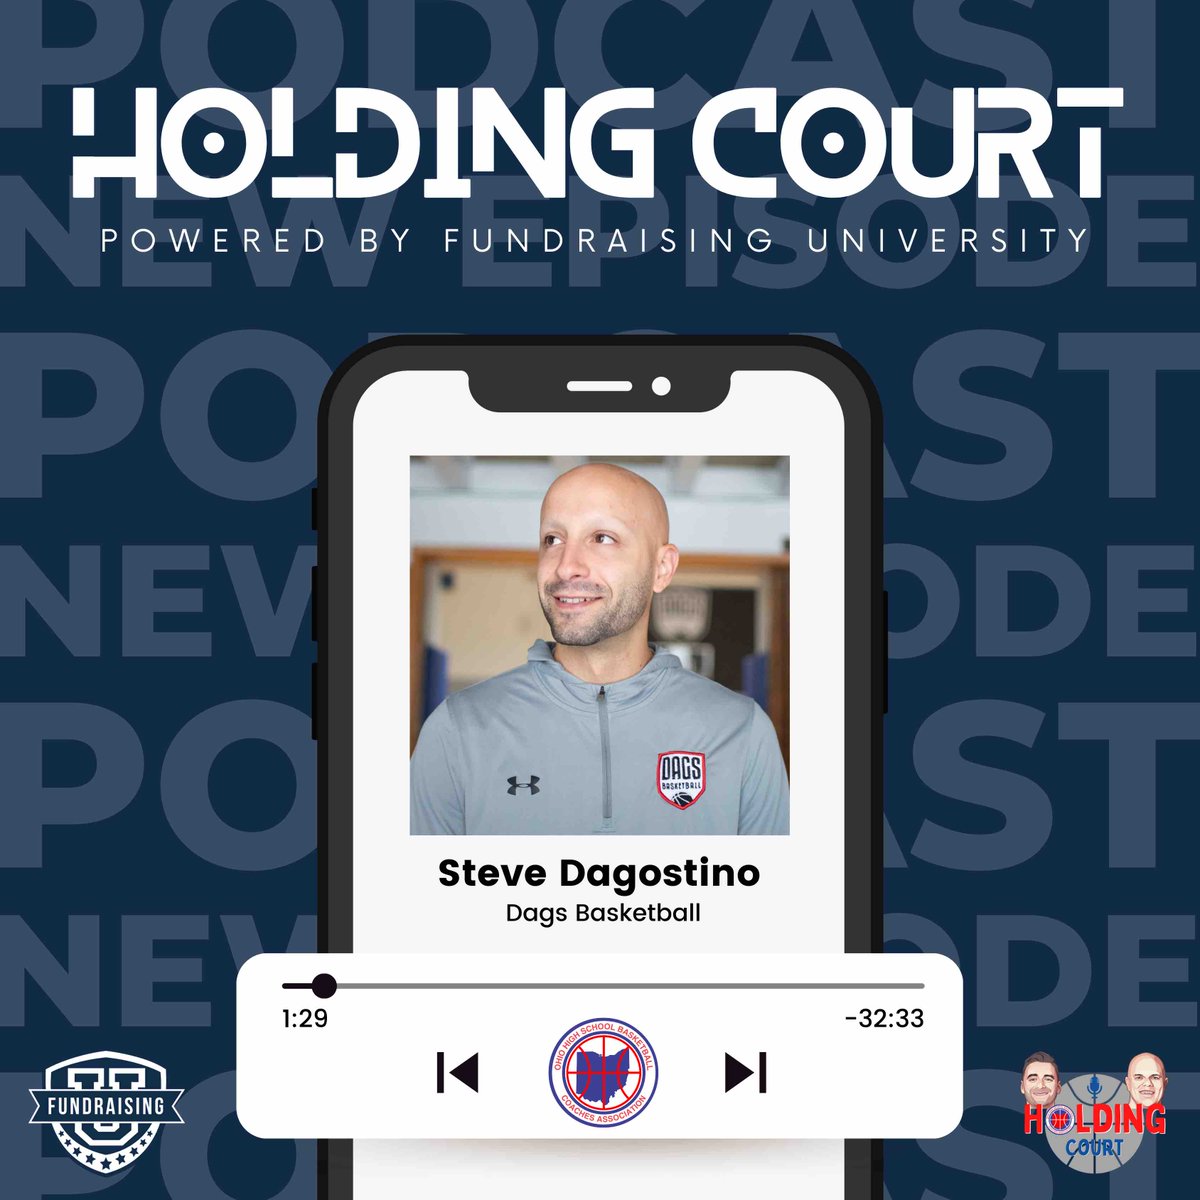 Listen to our conversation with @DagsBasketball. Steve is the best when it comes to player development. podcasts.apple.com/us/podcast/hol…